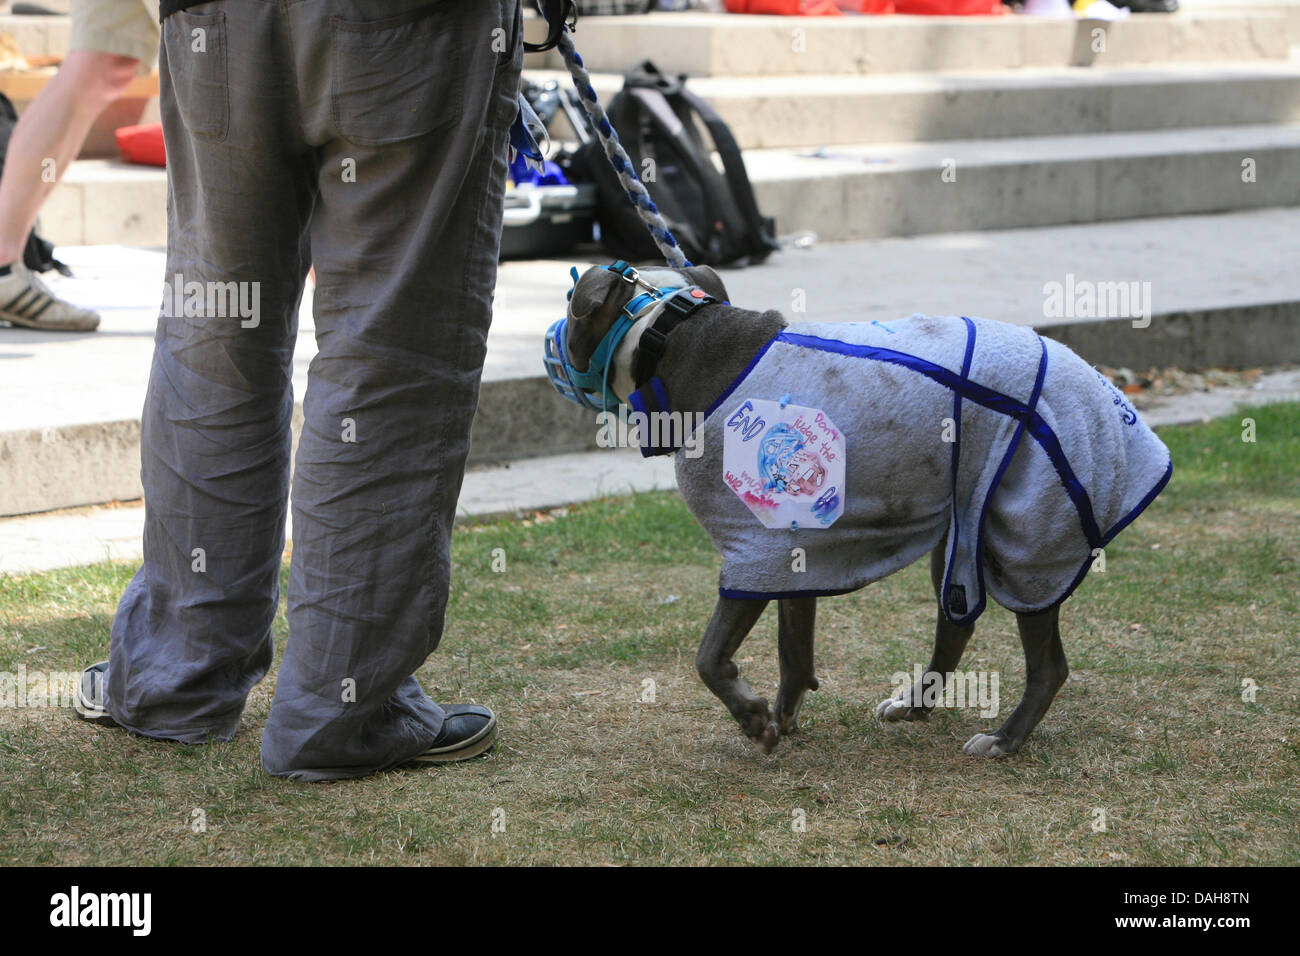 London, UK. 13th July, 2013. Anti BSL ('Breed Specific Legislation) protest outside Parliament  Credit:  Mario Mitsis / Alamy Live News Stock Photo